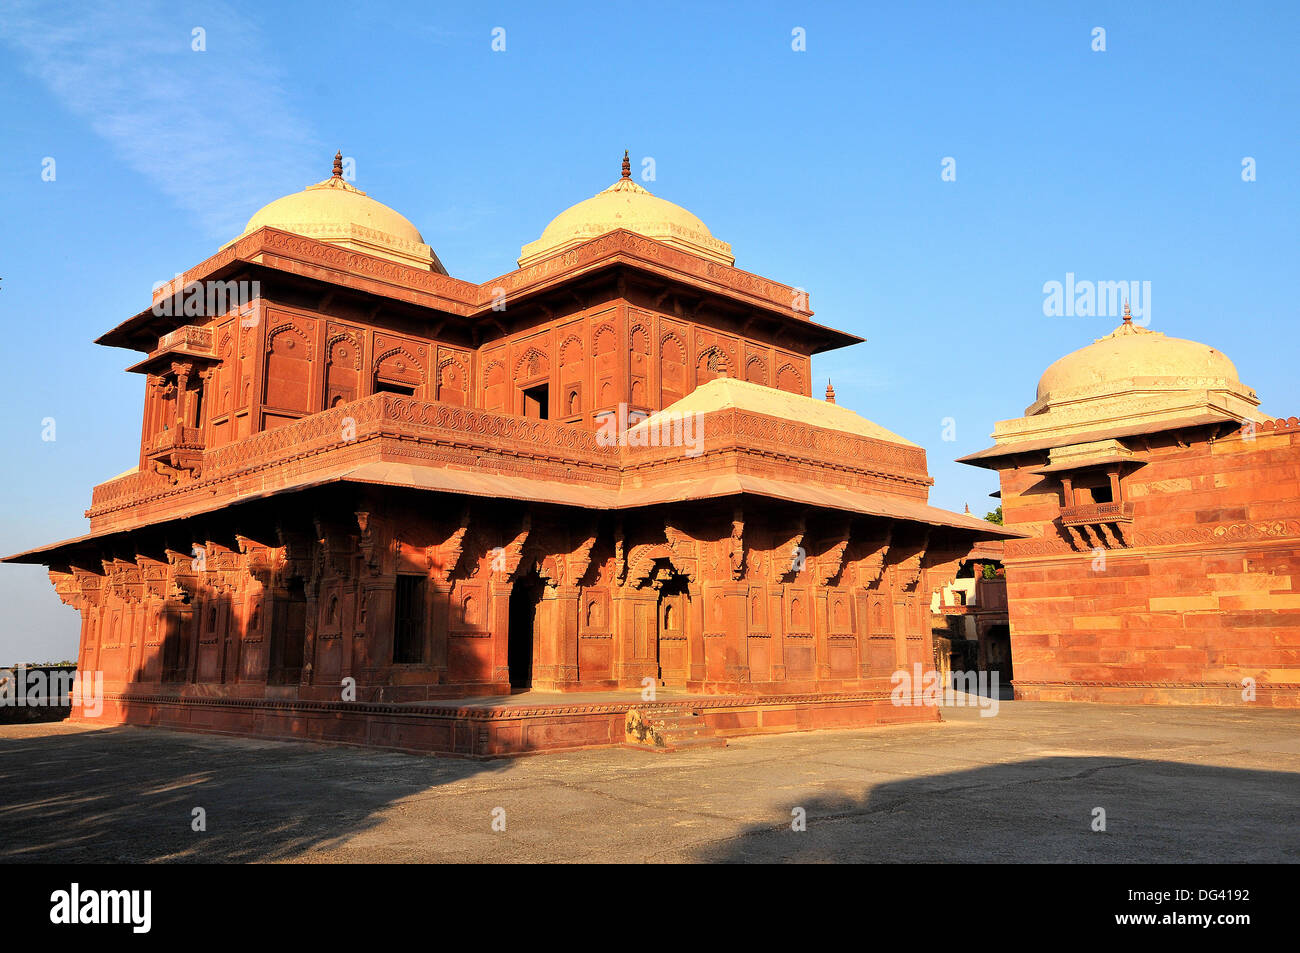 Finely sculpted Palace dating from the 16th century, Fatehpur Sikri, UNESCO World Heritage Site, Uttar Pradesh, India, Asia Stock Photo